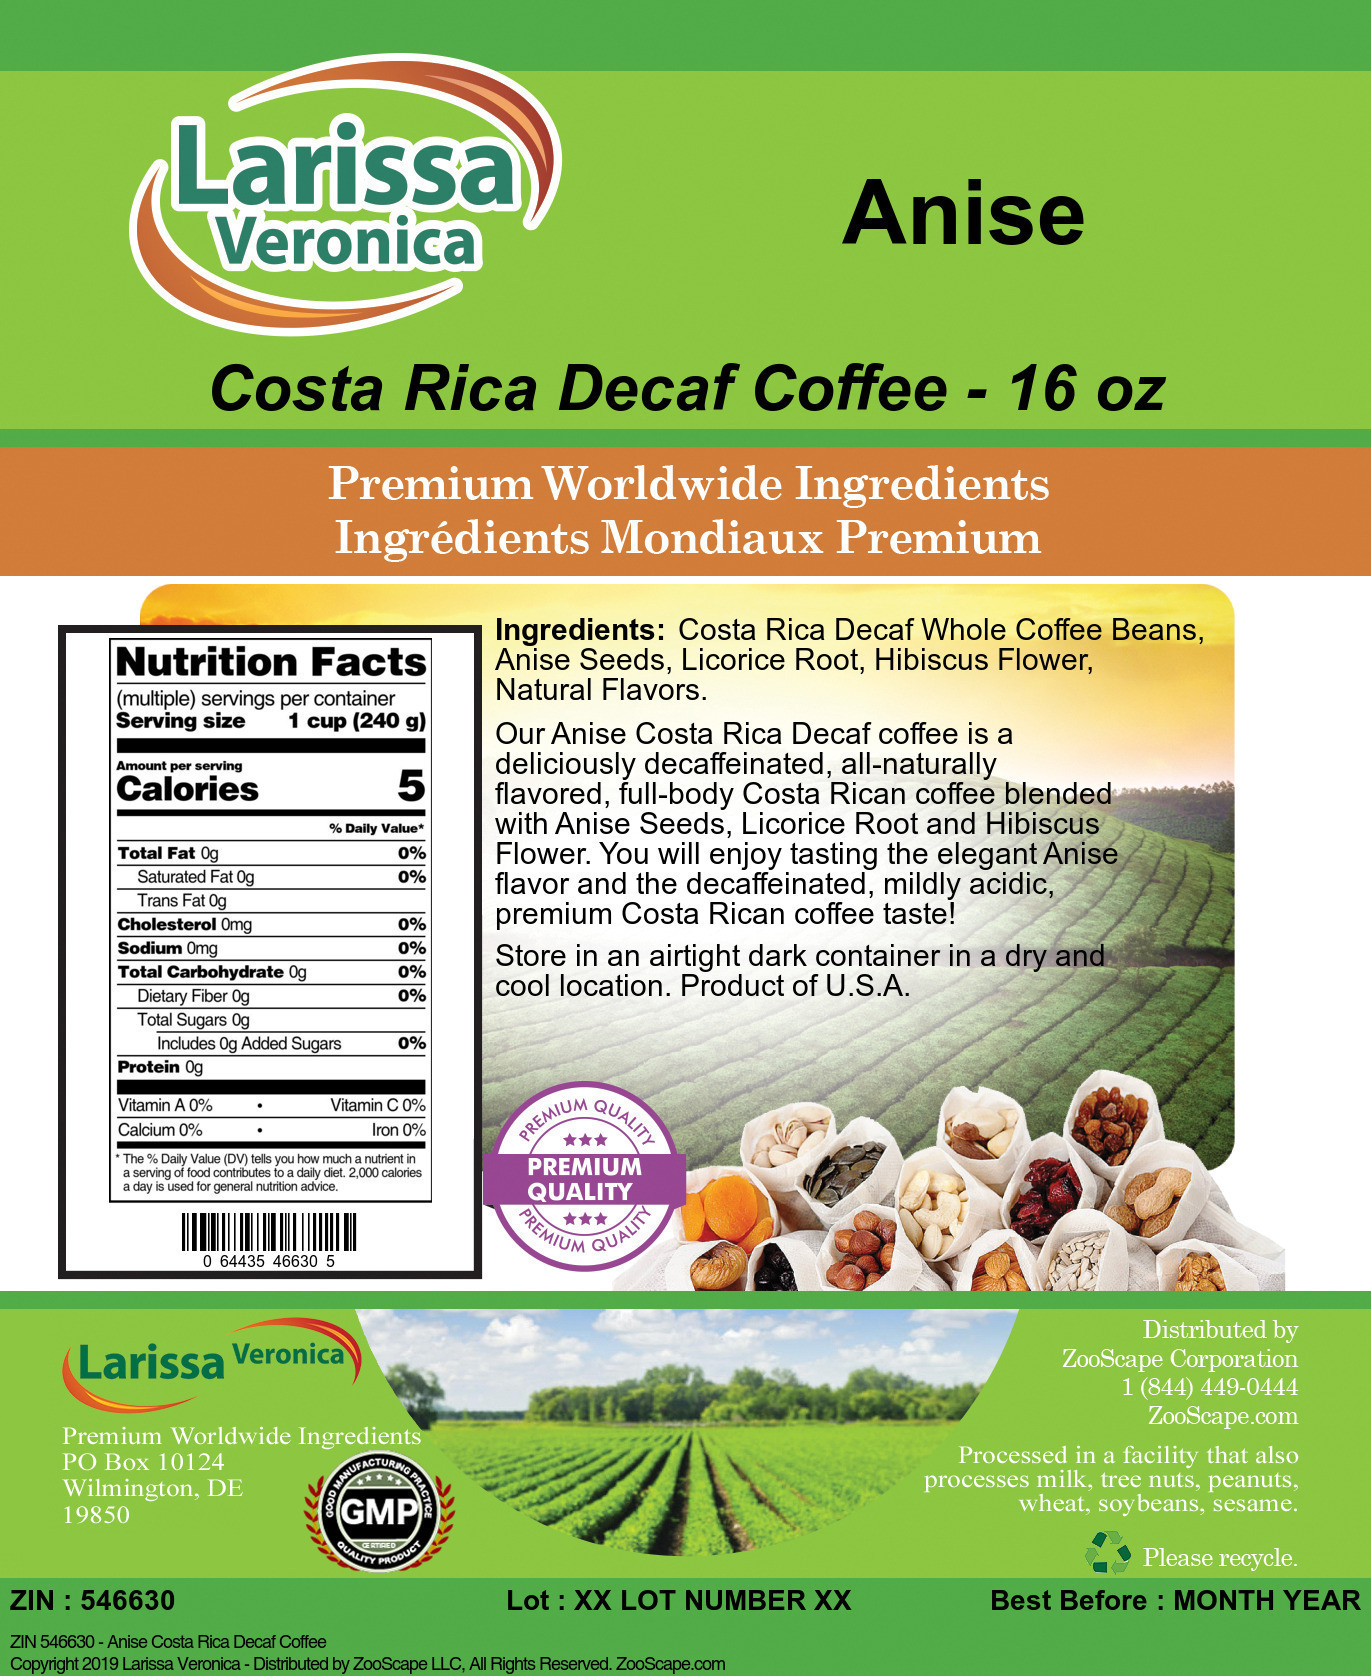 Anise Costa Rica Decaf Coffee - Label